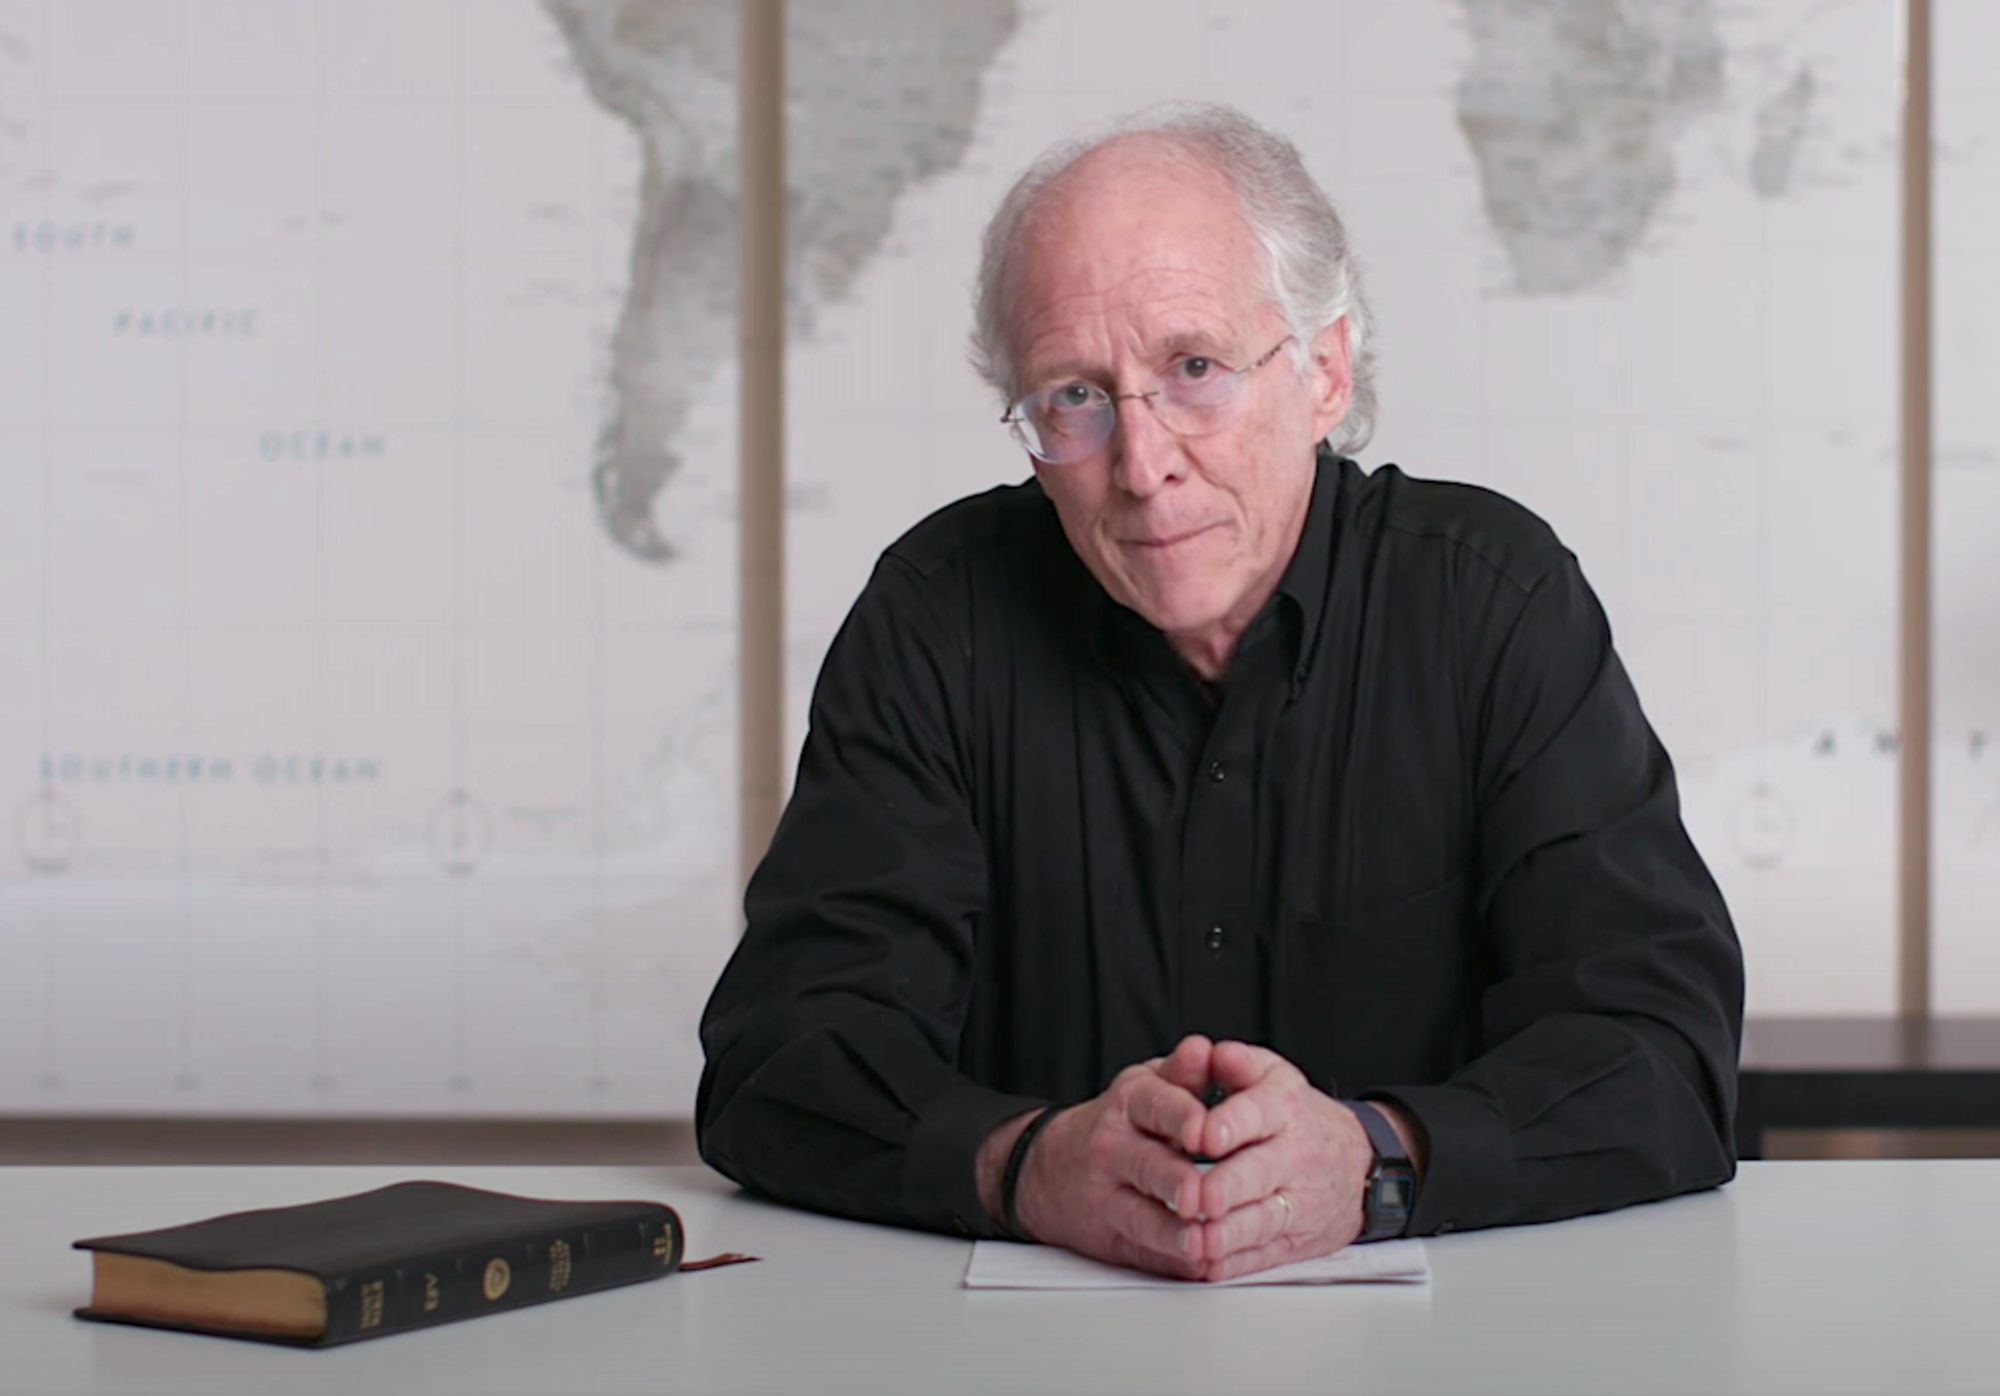 Theologian John Piper’s Case Against Trump Is Intellectually And